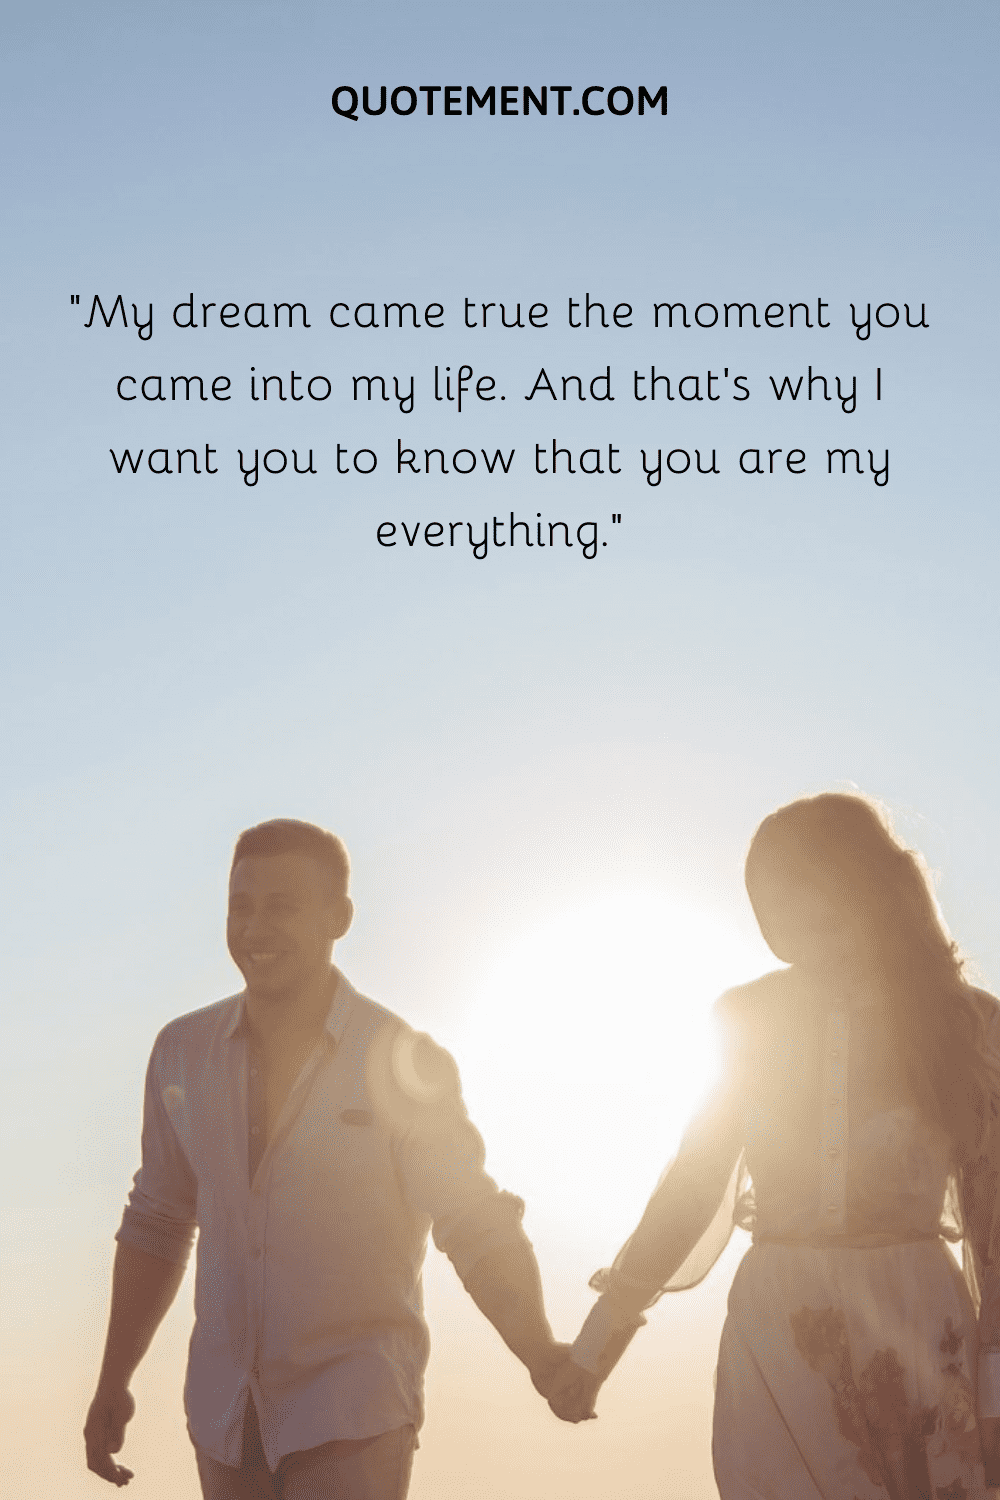 “My dream came true the moment you came into my life. And that’s why I want you to know that you are my everything.”